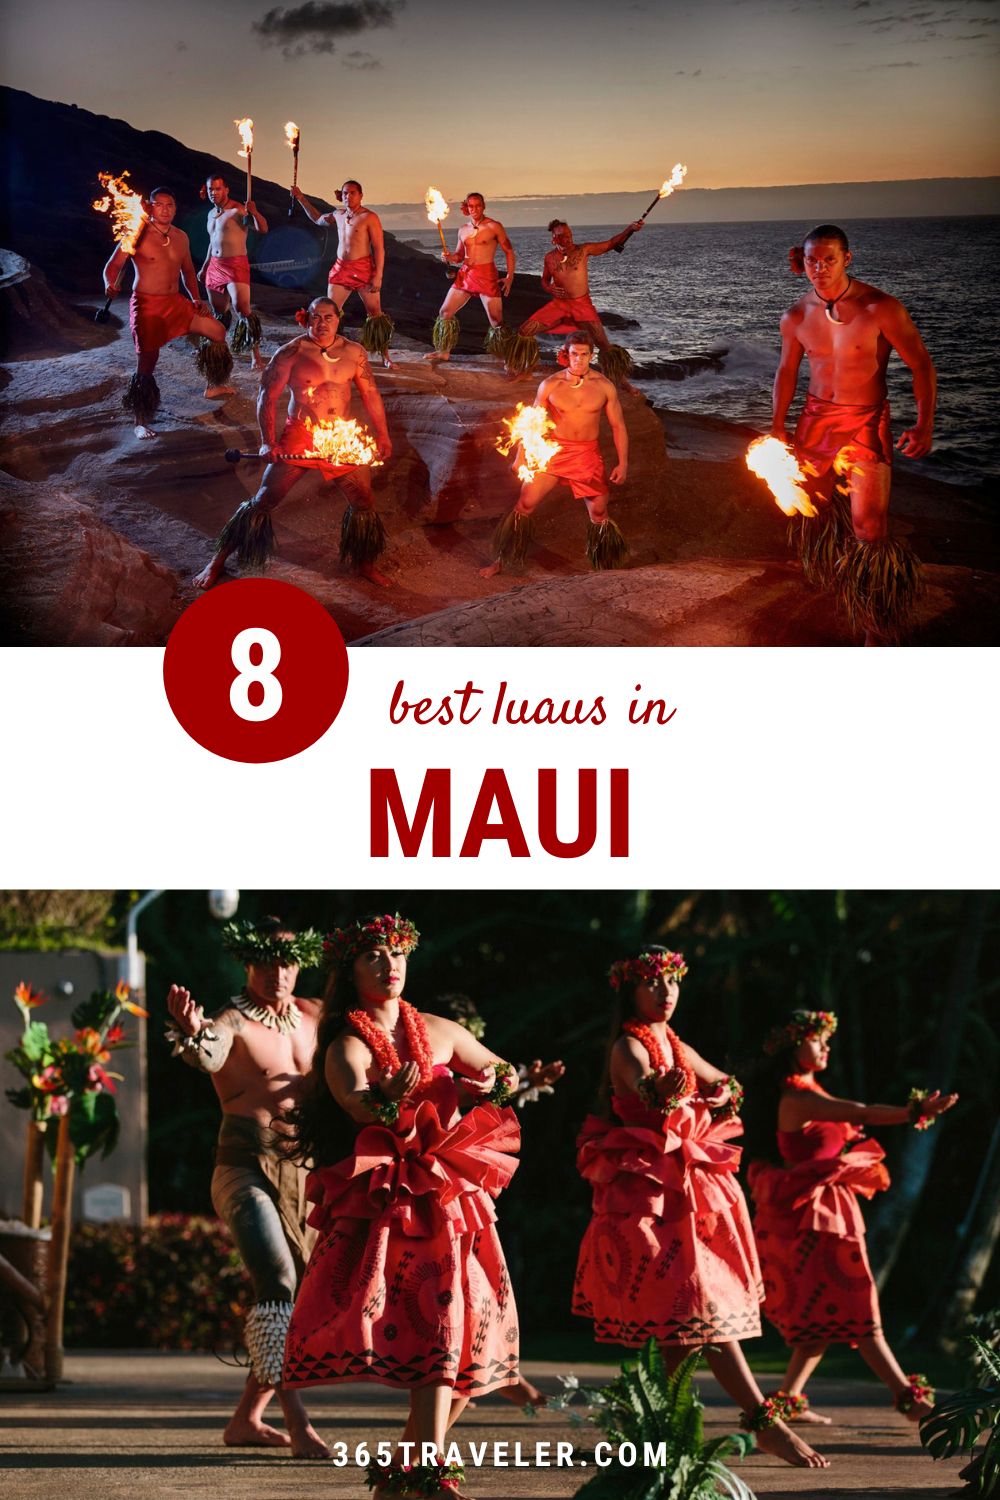 8 BEST LUAUS IN MAUI FOR EVERY TYPE OF TRAVELER